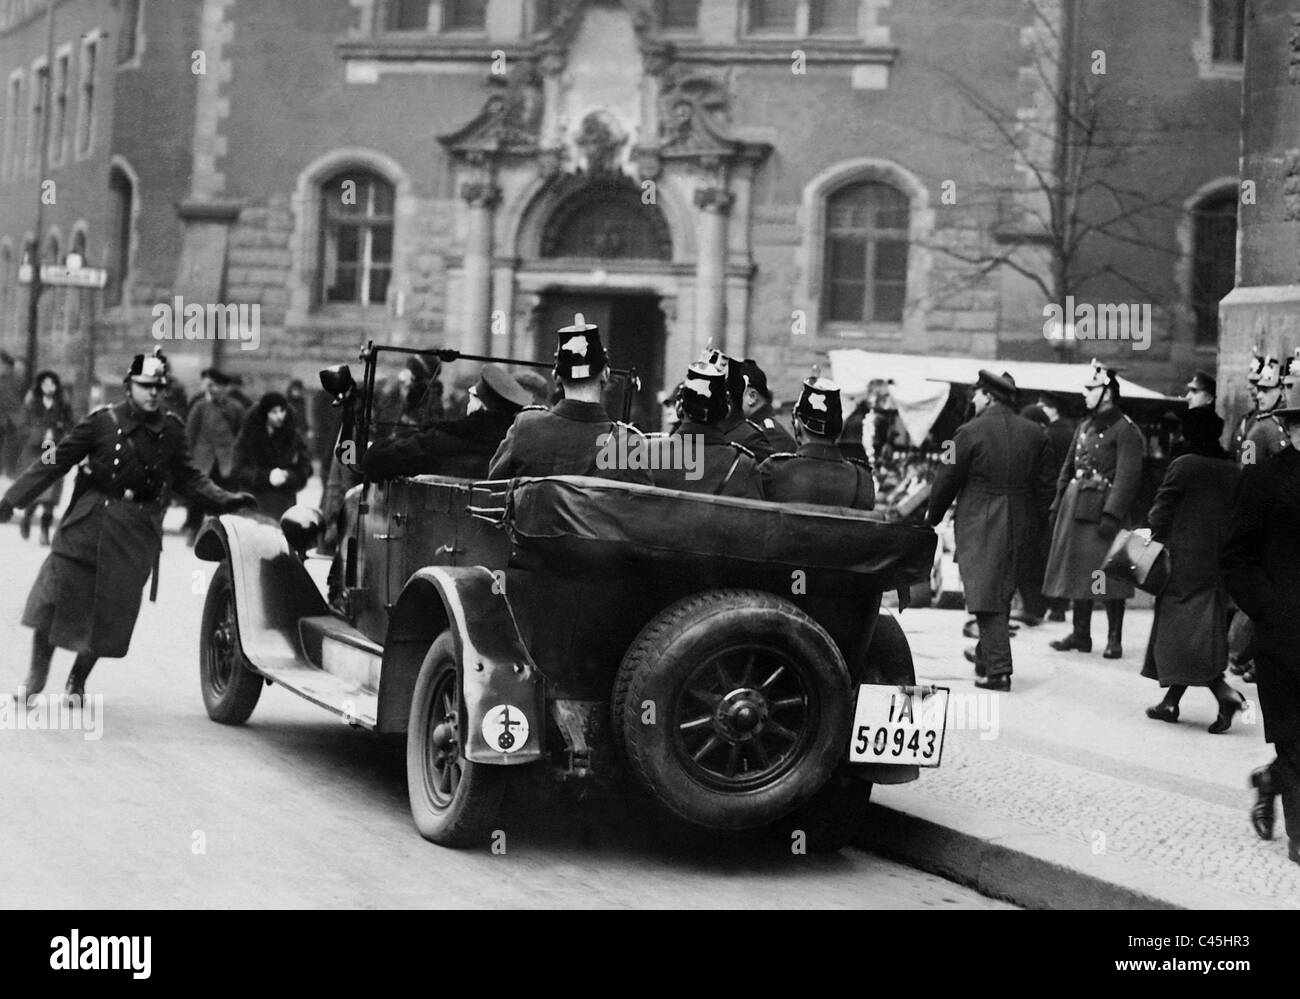 Assault vehicle of the Berlin police in the 1920s Stock Photo